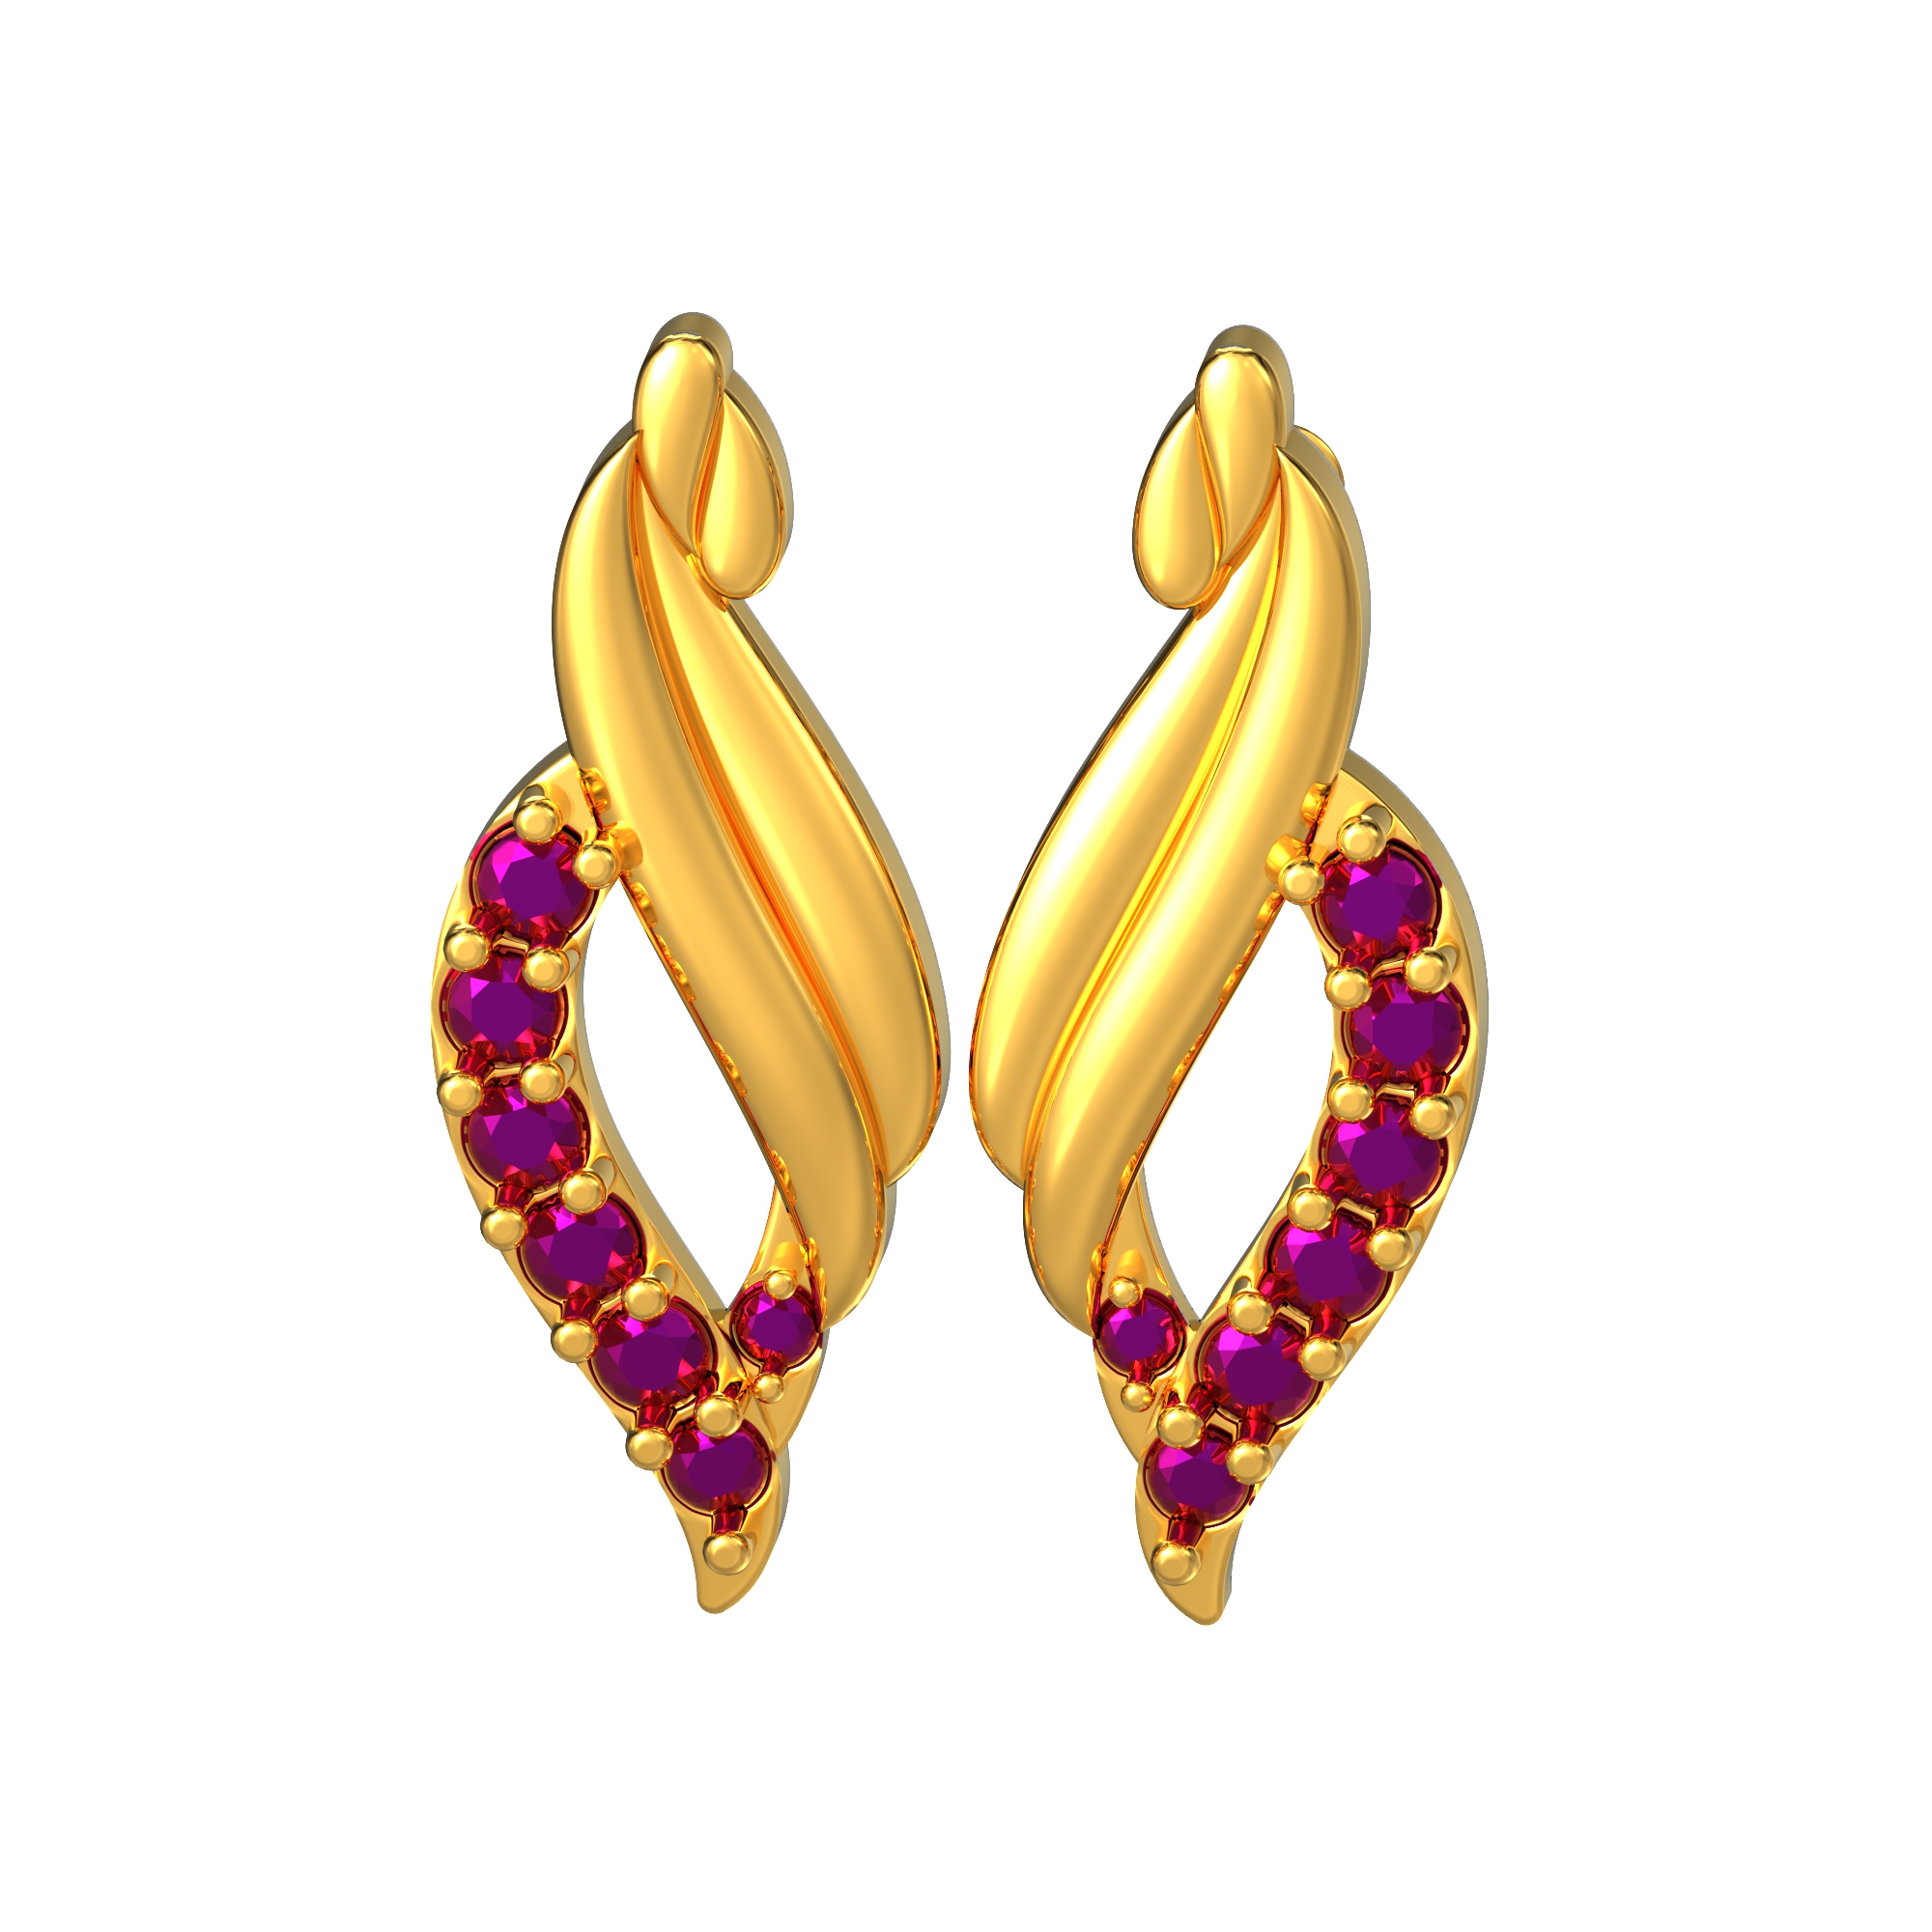 Curve Wave Design Gold Earrings